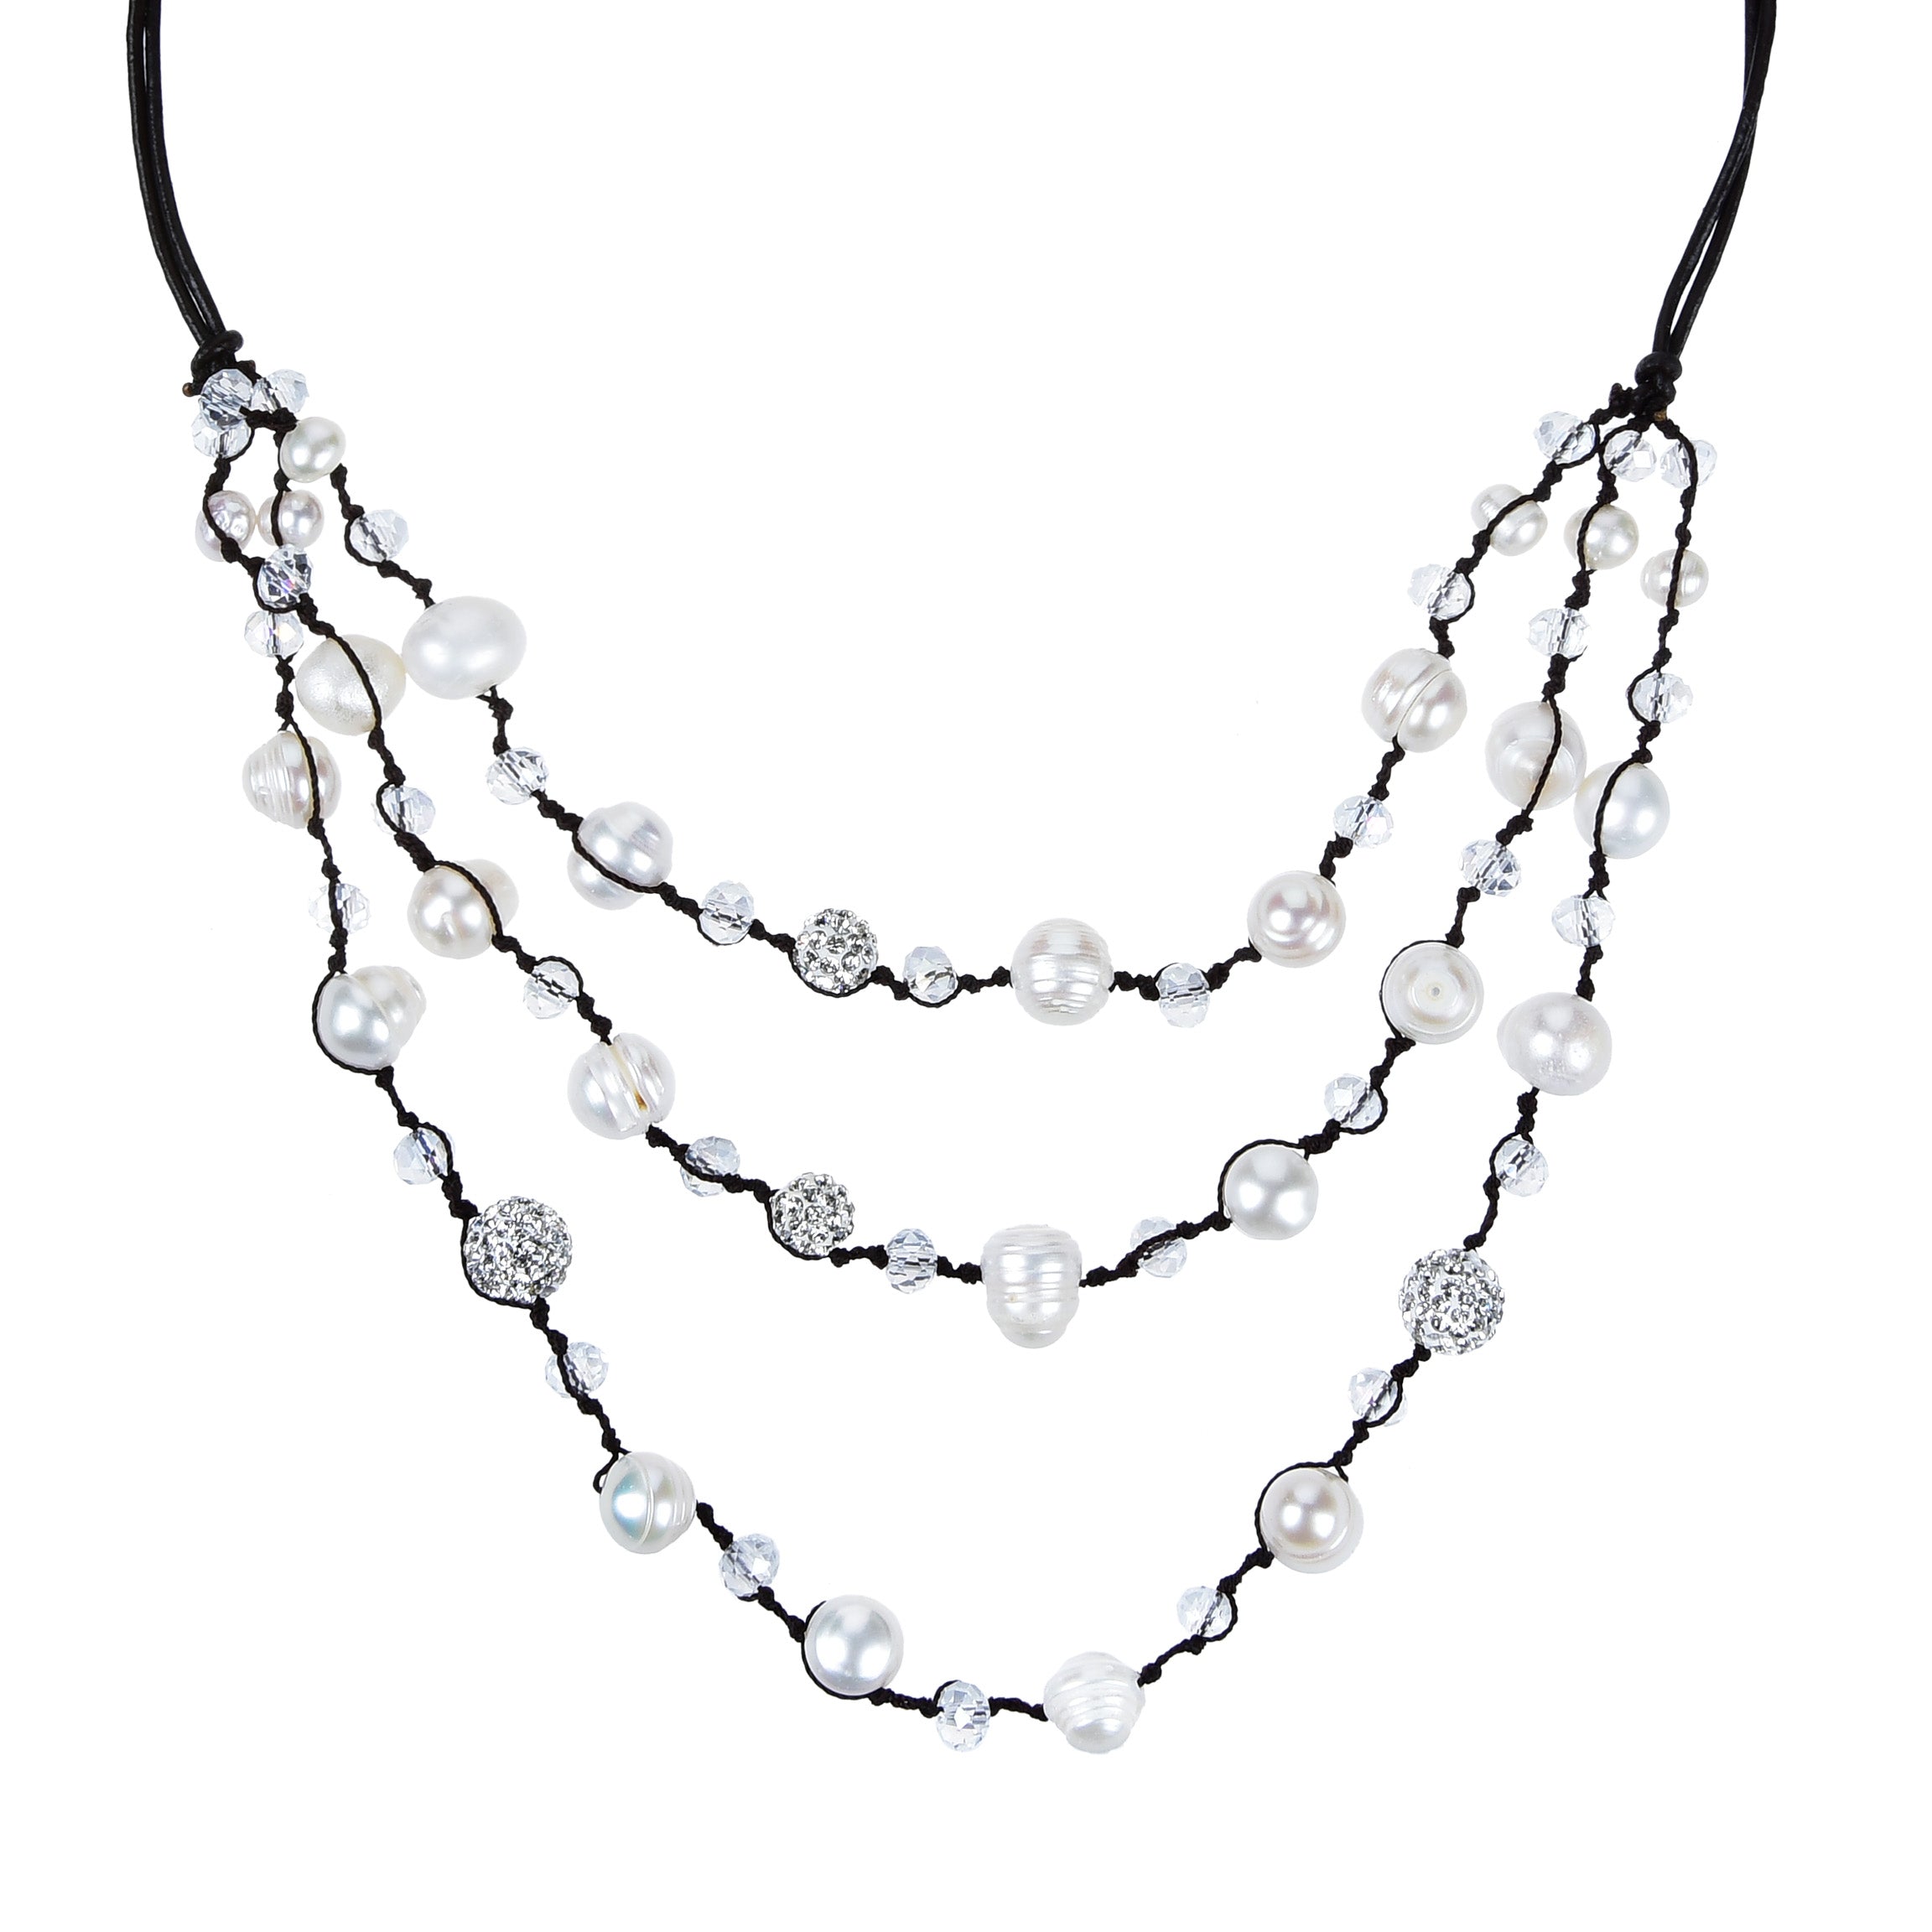 Strand White Pearl Short Necklaces N3035